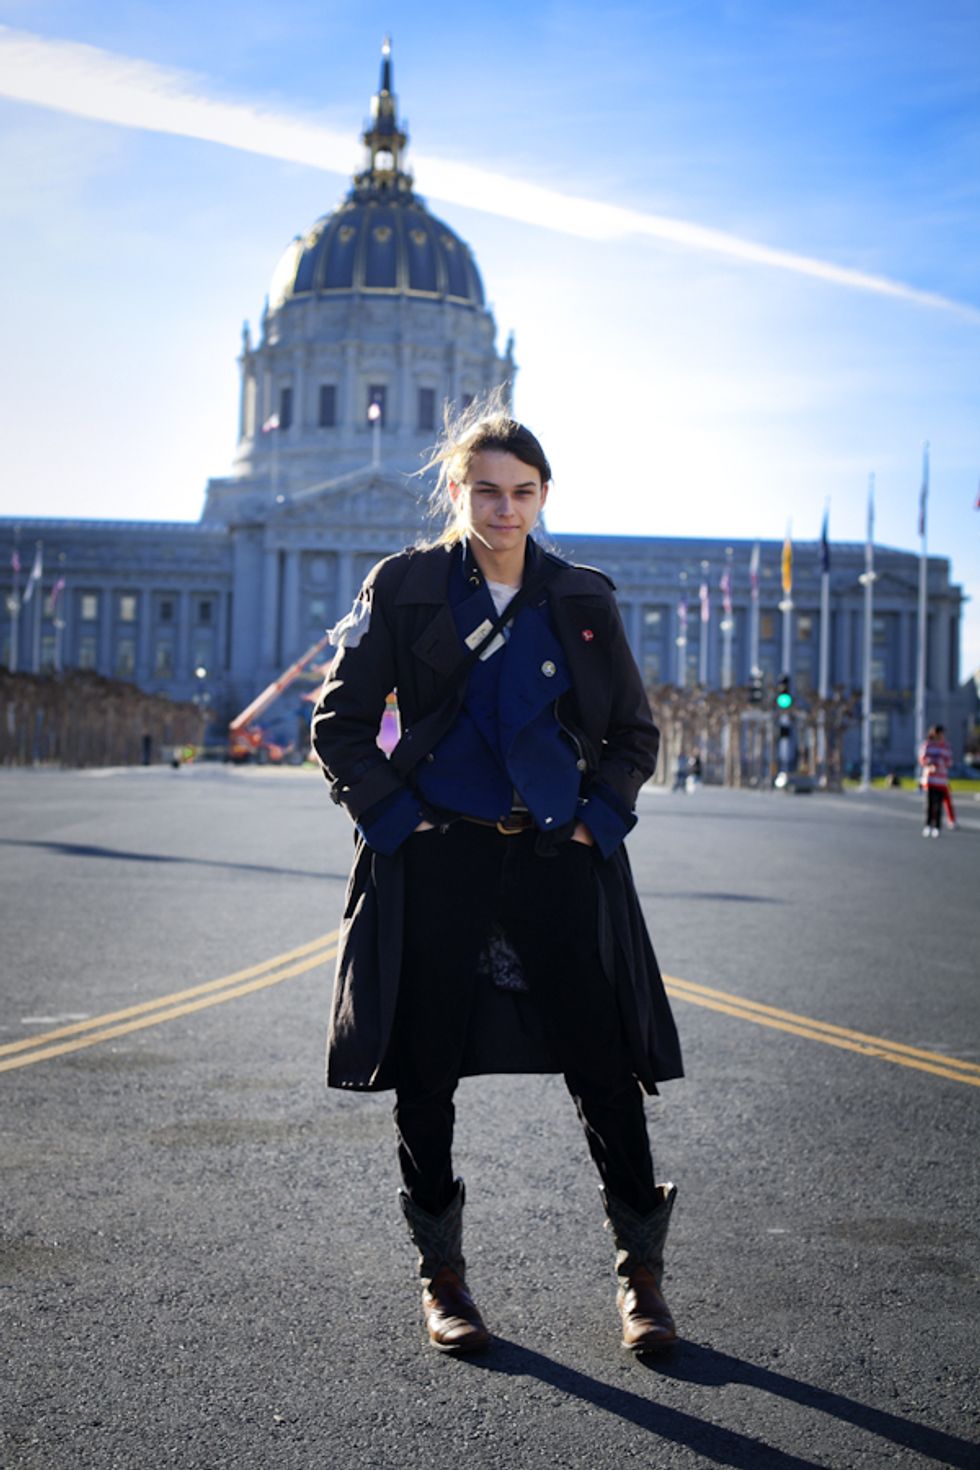 SF Street Style: A Young Male Model Makes Grunge Work in Civic Center